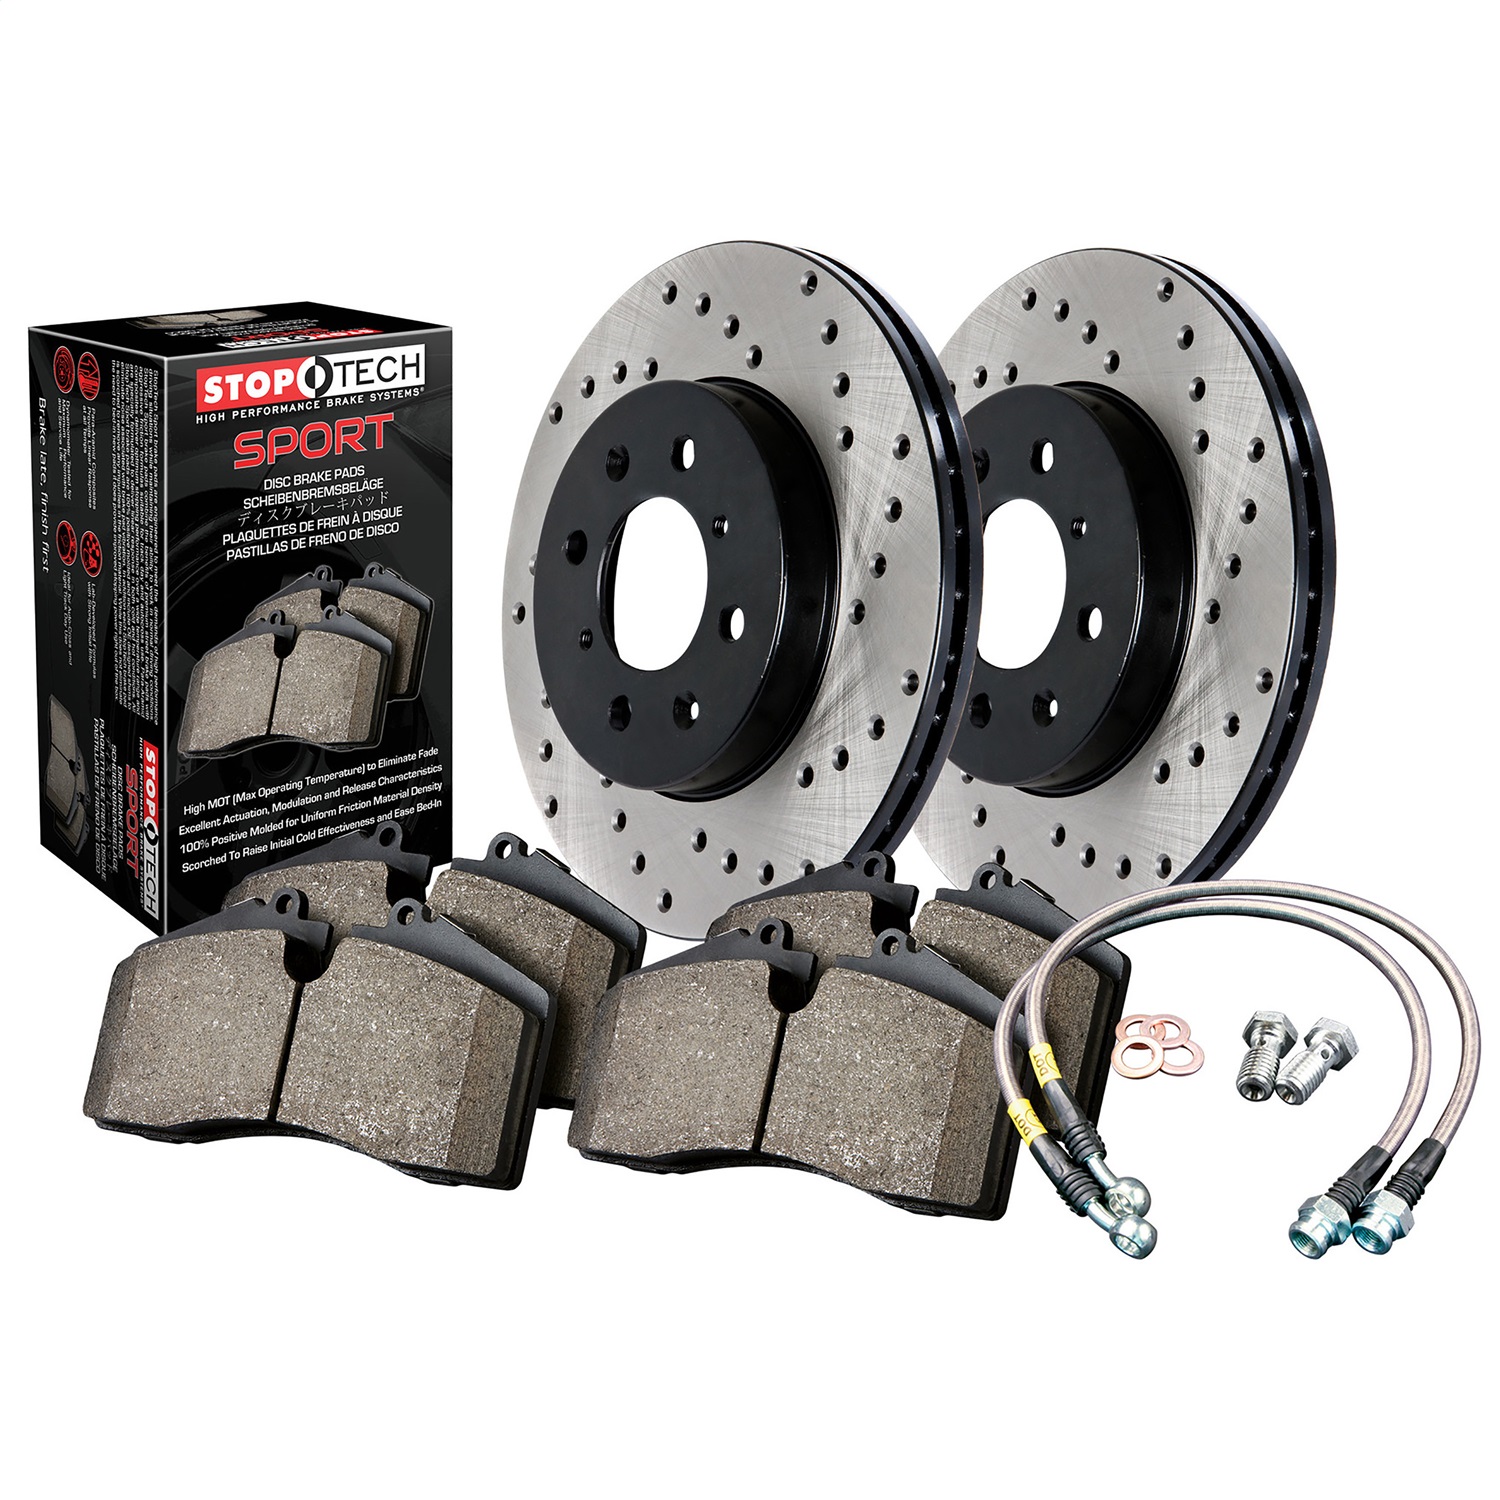 StopTech 979.39002R Sport Disc Brake Kit w/Cross-Drilled Rotors Fits 12-18 Focus